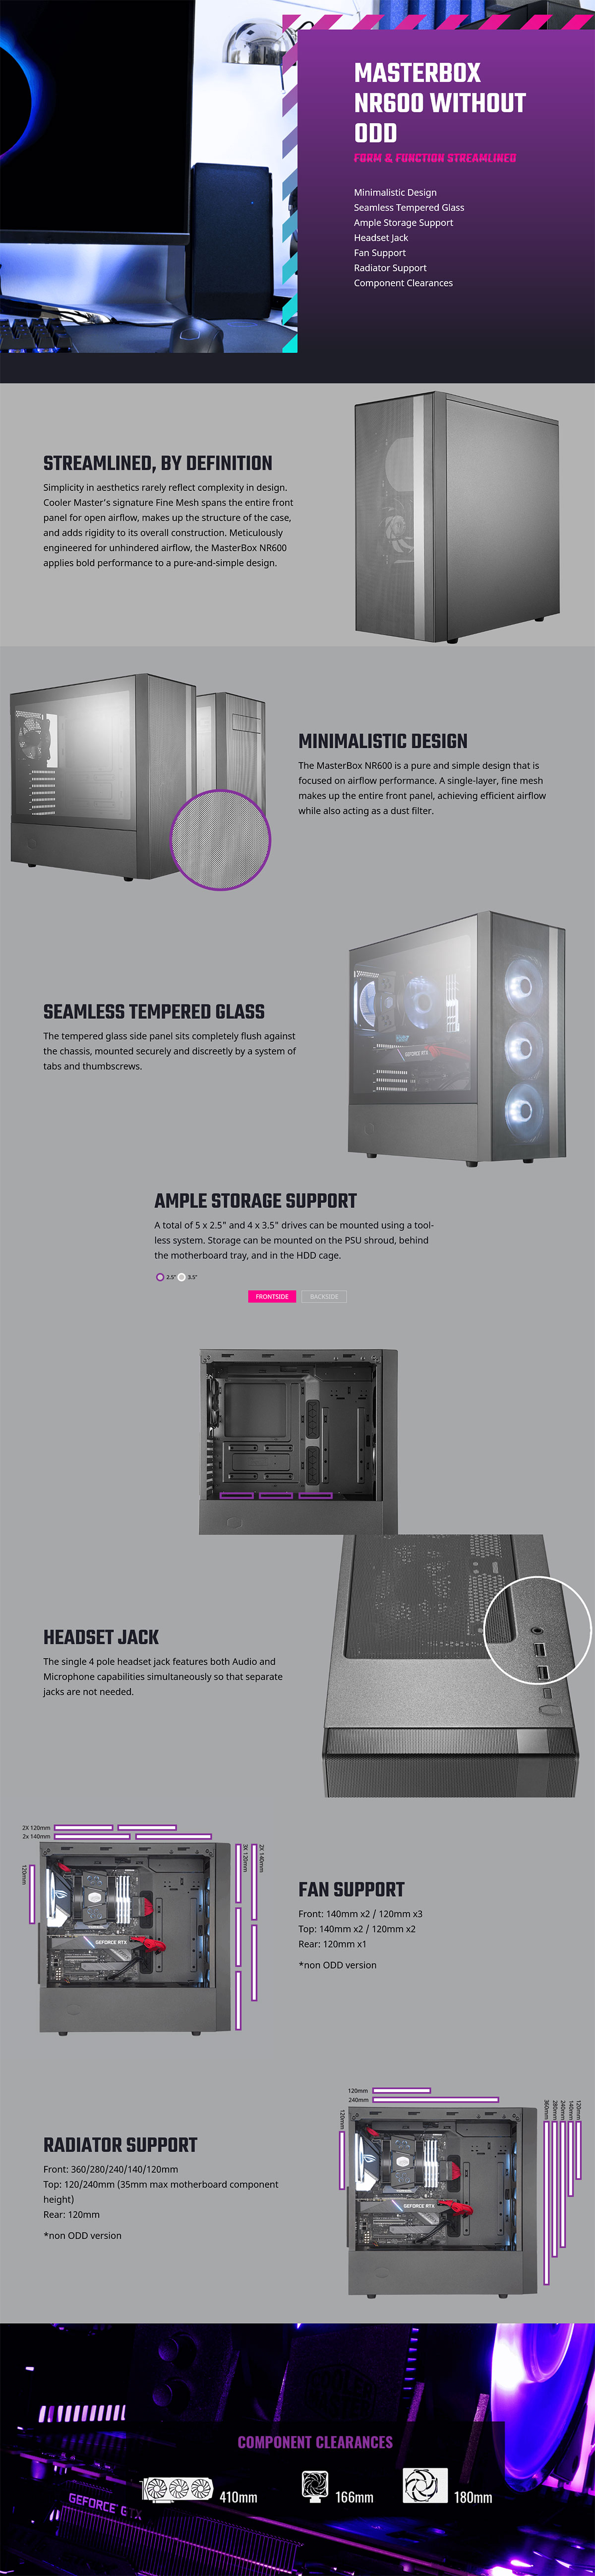 Cooler Master NR600 Mid Tower Case with Tempered Glass Side Panel Details